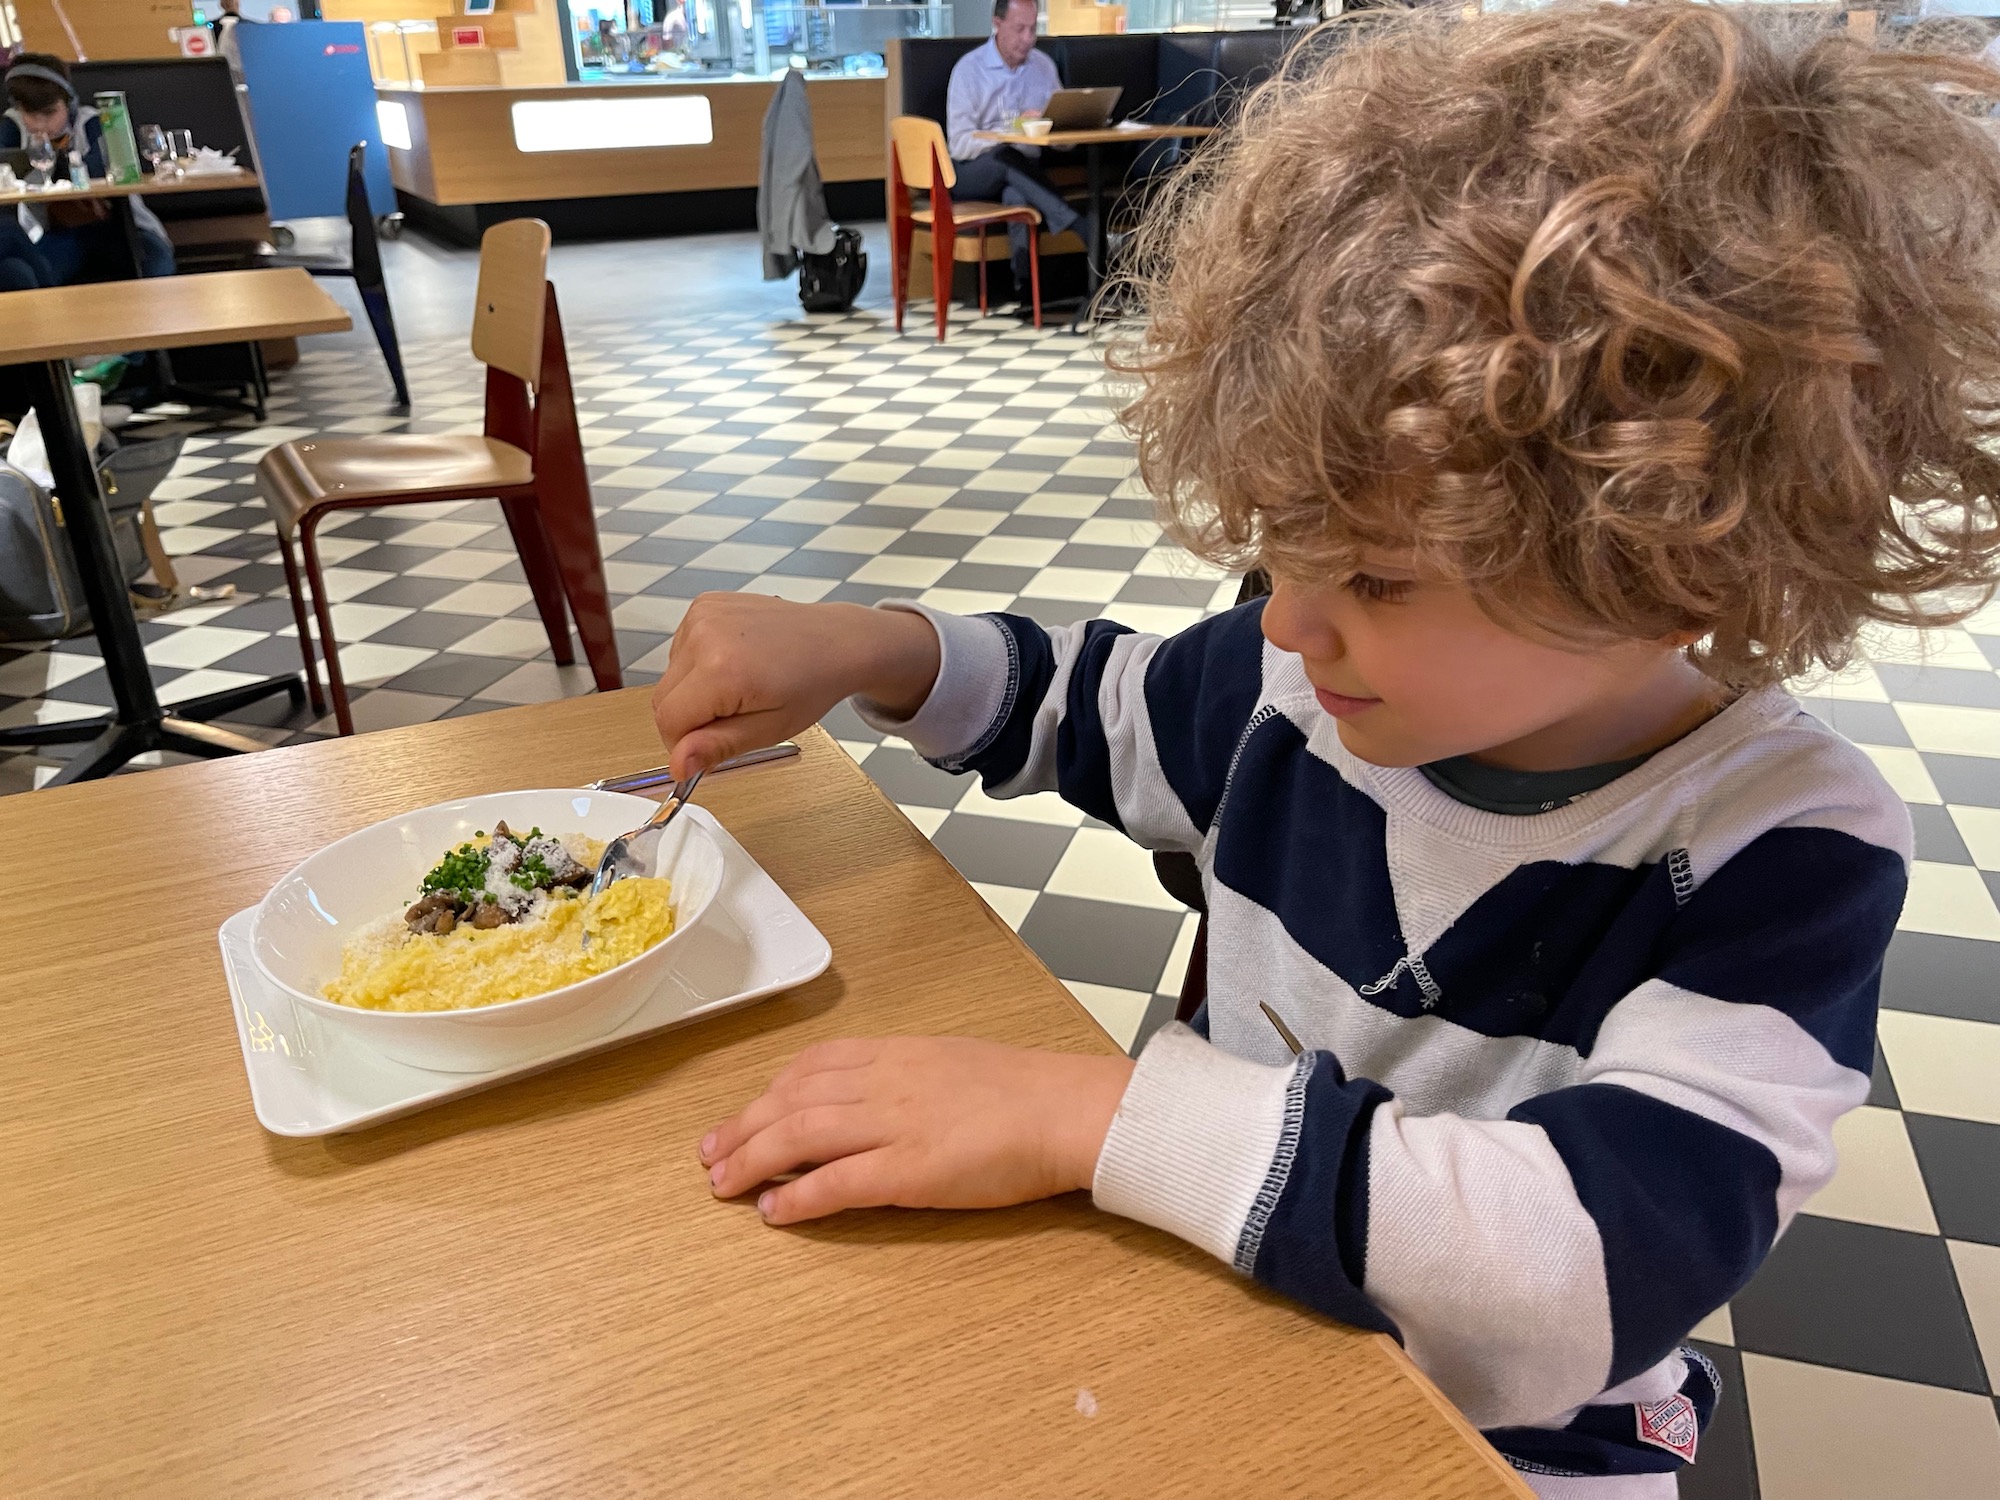 a child eating food at a table